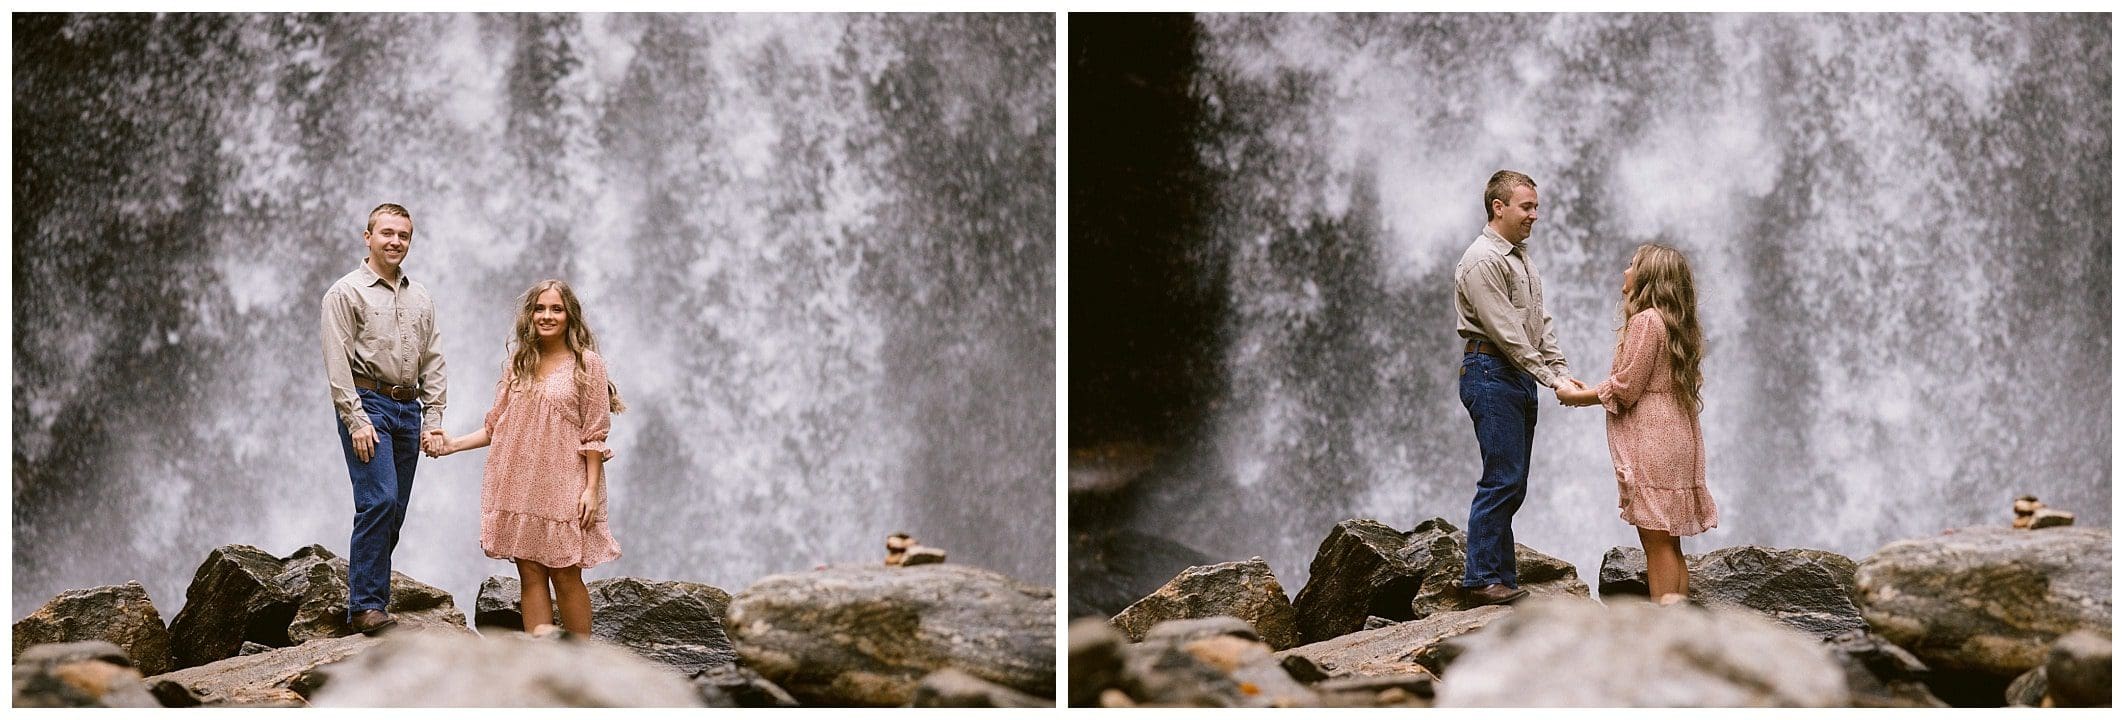 waterfall engagement session in Brevard, NC